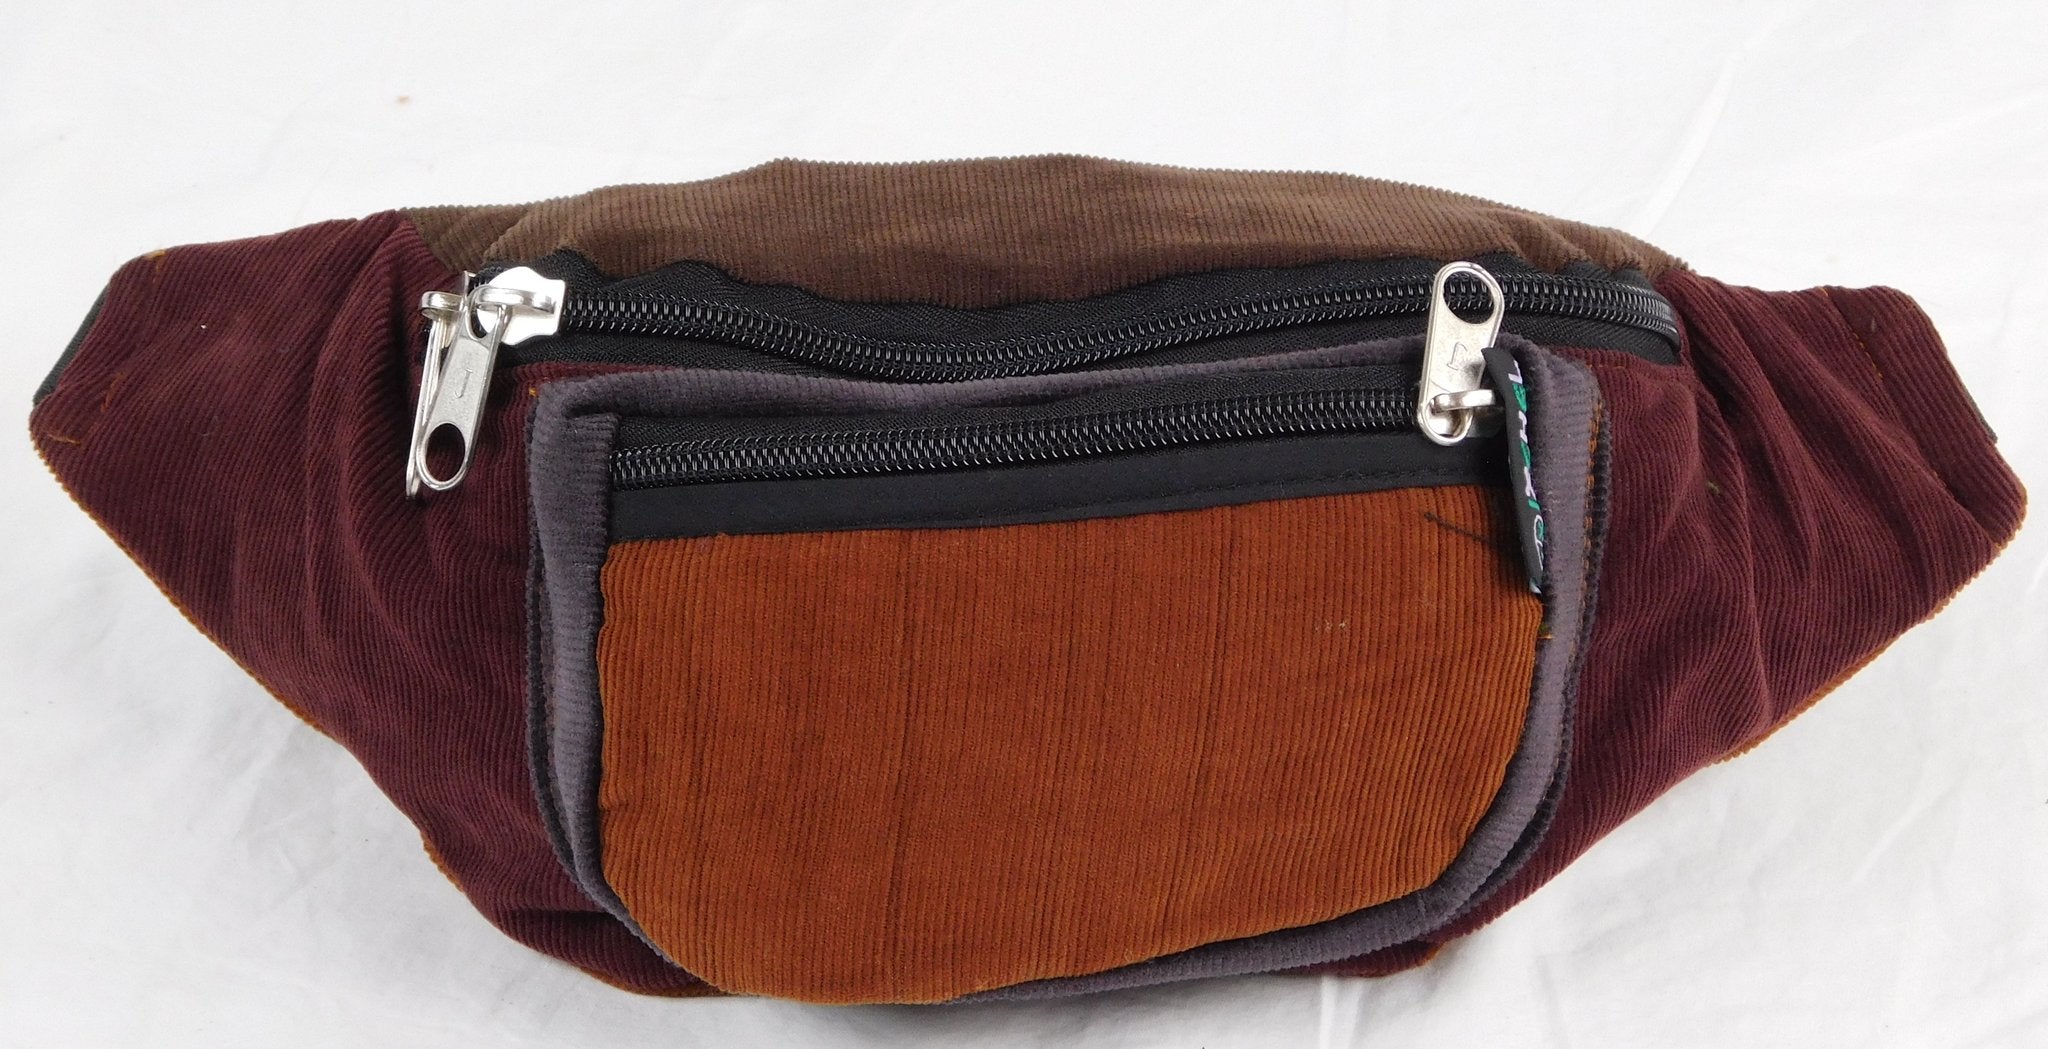 Three Pocket Fanny Pack in Corduroy - Extra Large